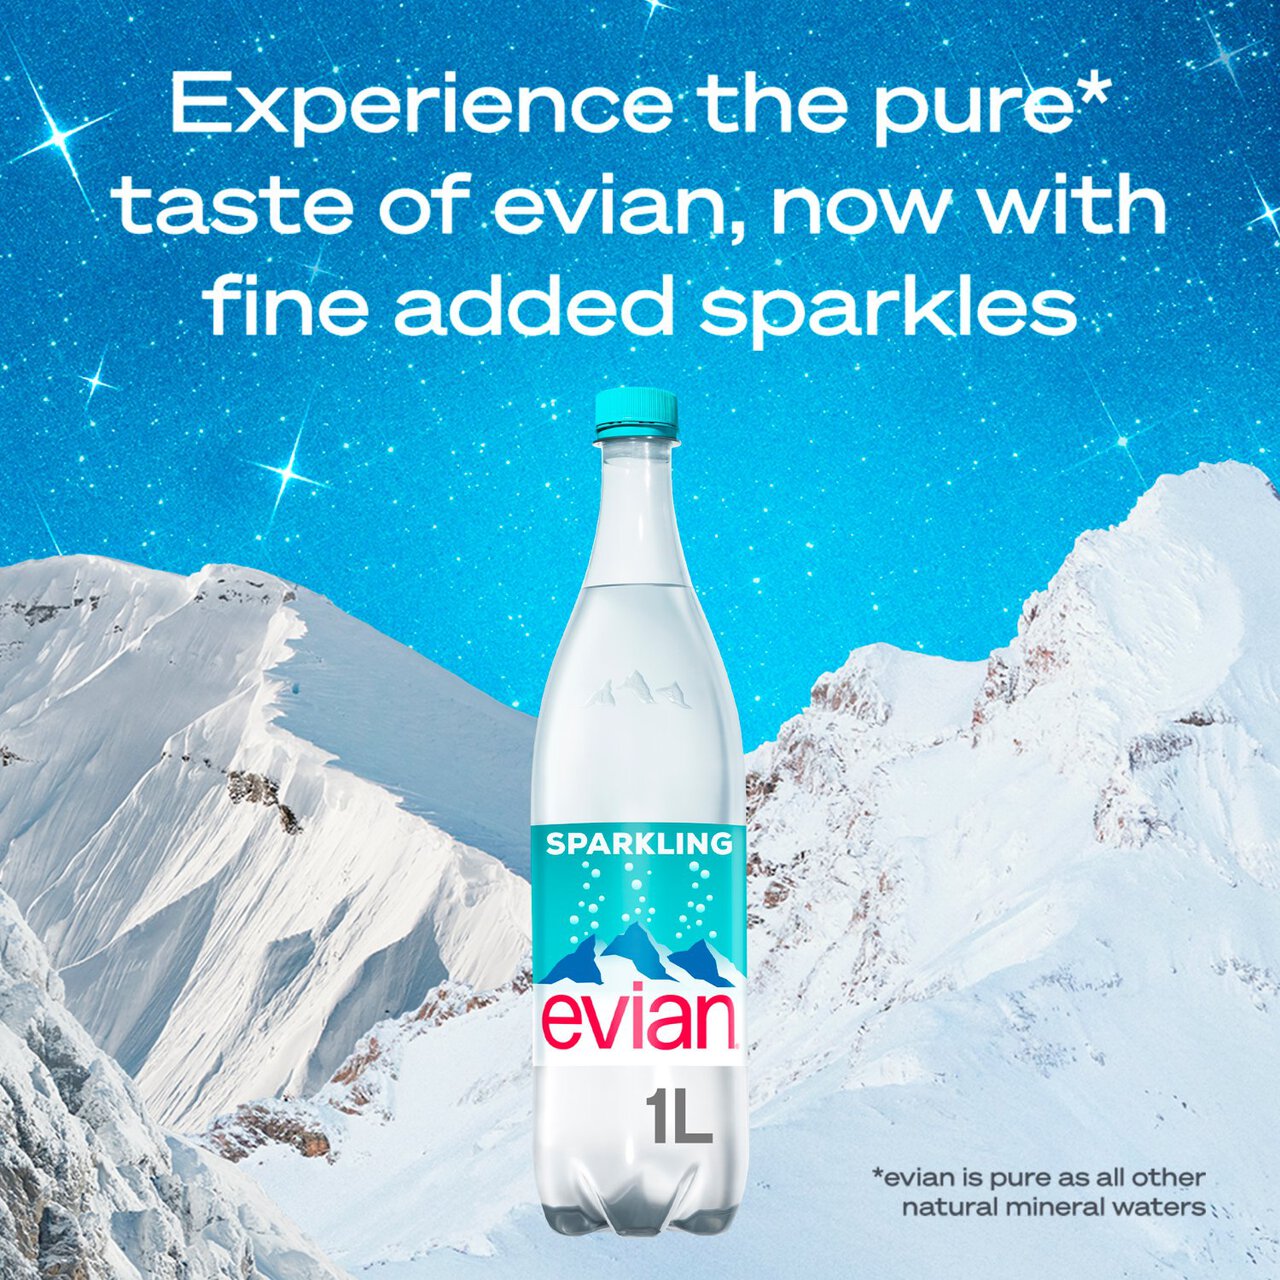 Driving product trial for Evian sparkling water